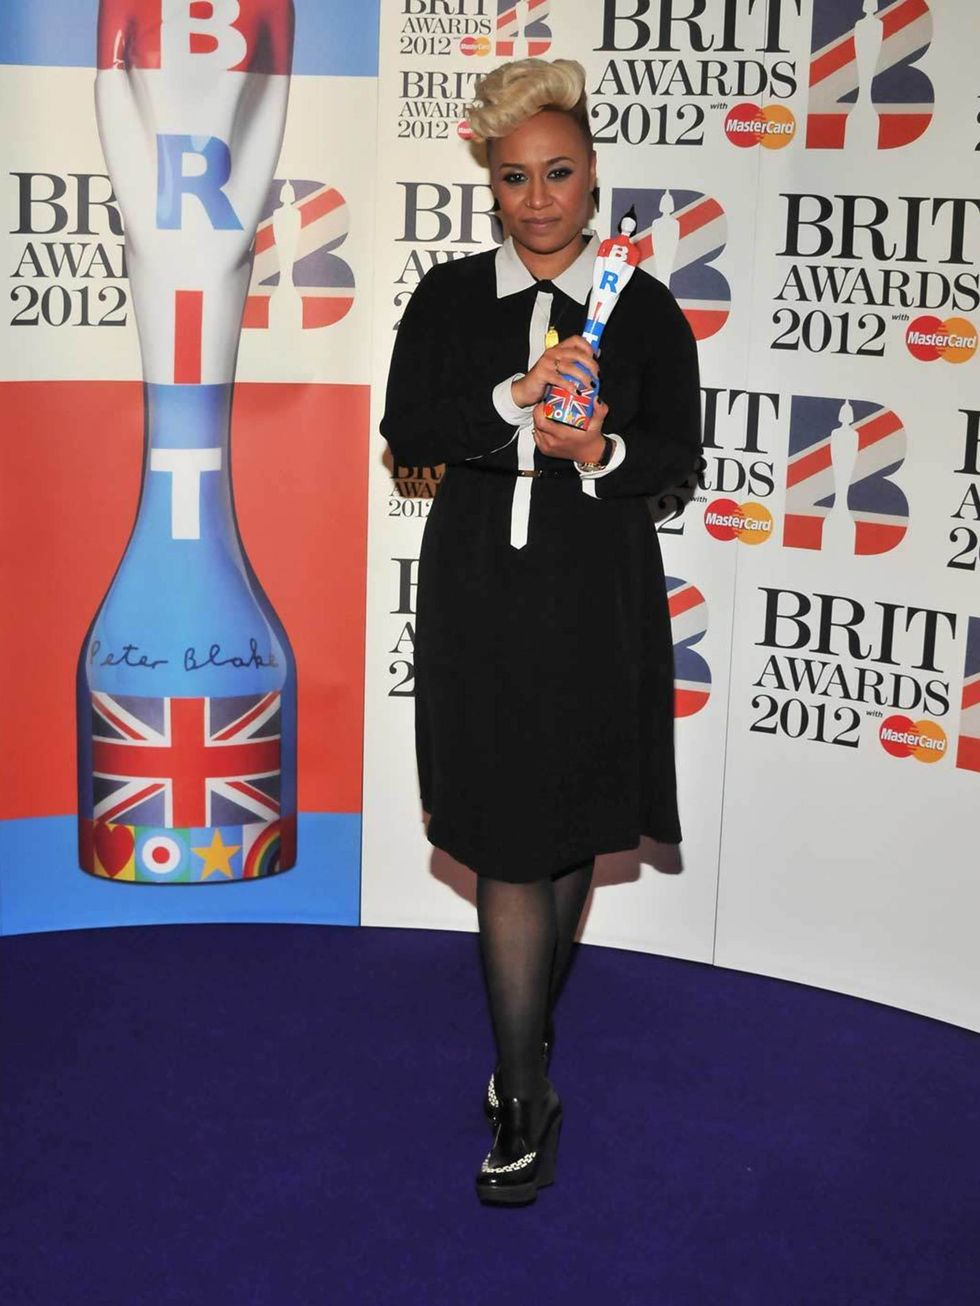 <p><a href="http://www.elleuk.com/star-style/red-carpet/elle-style-awards-2012">ELLE Style Awards</a> performer <a href="http://www.elleuk.com/beauty/beauty-notes-daily/emeli-sande-s-elle-style-awards-beauty-secrets">Emeli Sande</a> poses with her Critics